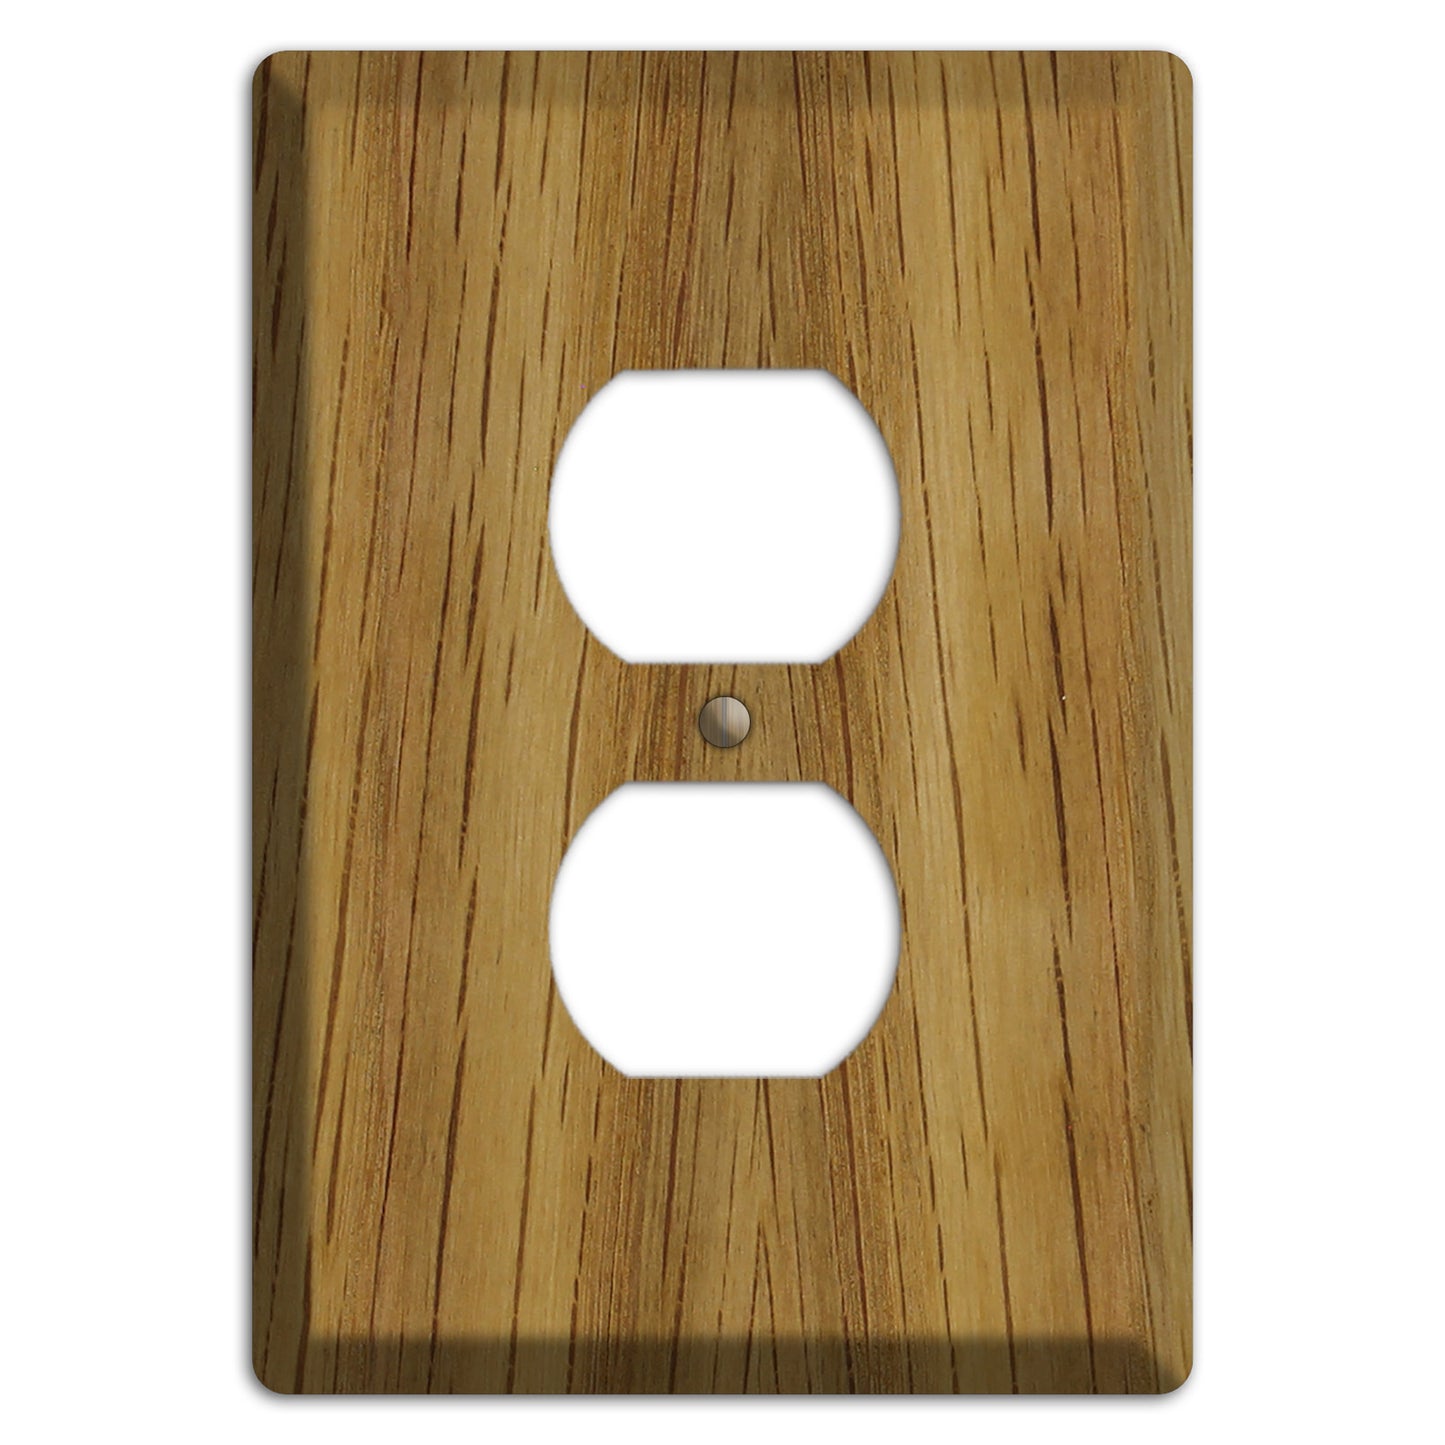 White Oak Wood Duplex Outlet Cover Plate